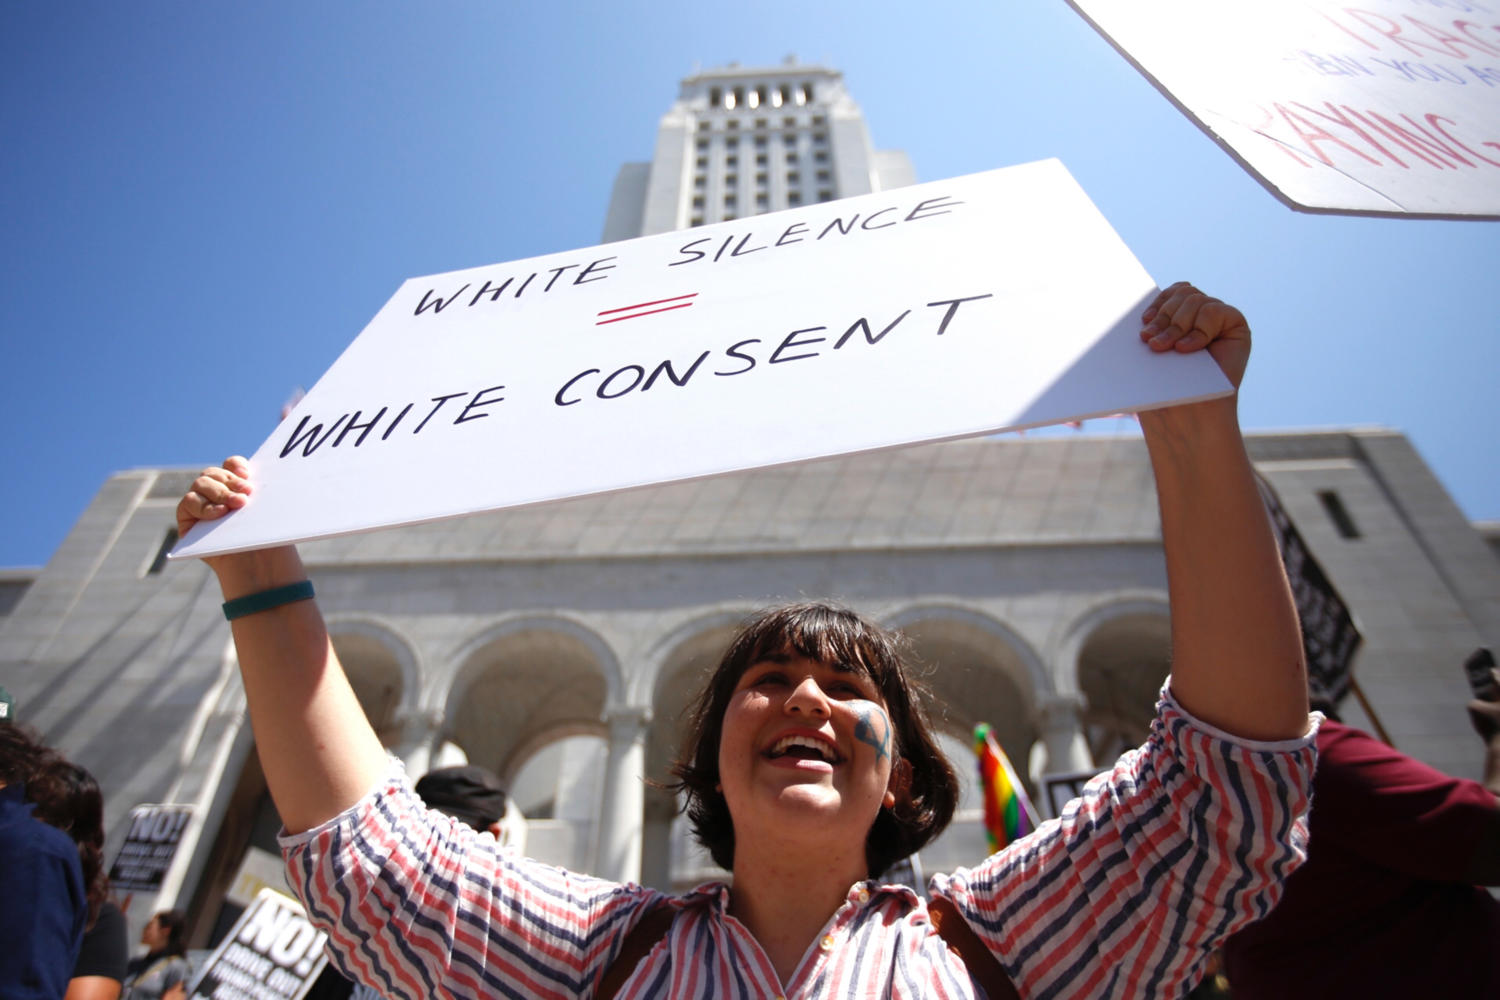 Juliette Polonsky, Pasadena in a during rally a local group calling itself Refuse Fascism rallies at City Hall in Los Angeles to denounce the violence and honor the victims in Charlottesville, Virginia August 13, 2017. (Francine Orr/ Los Angeles Times/TNS)